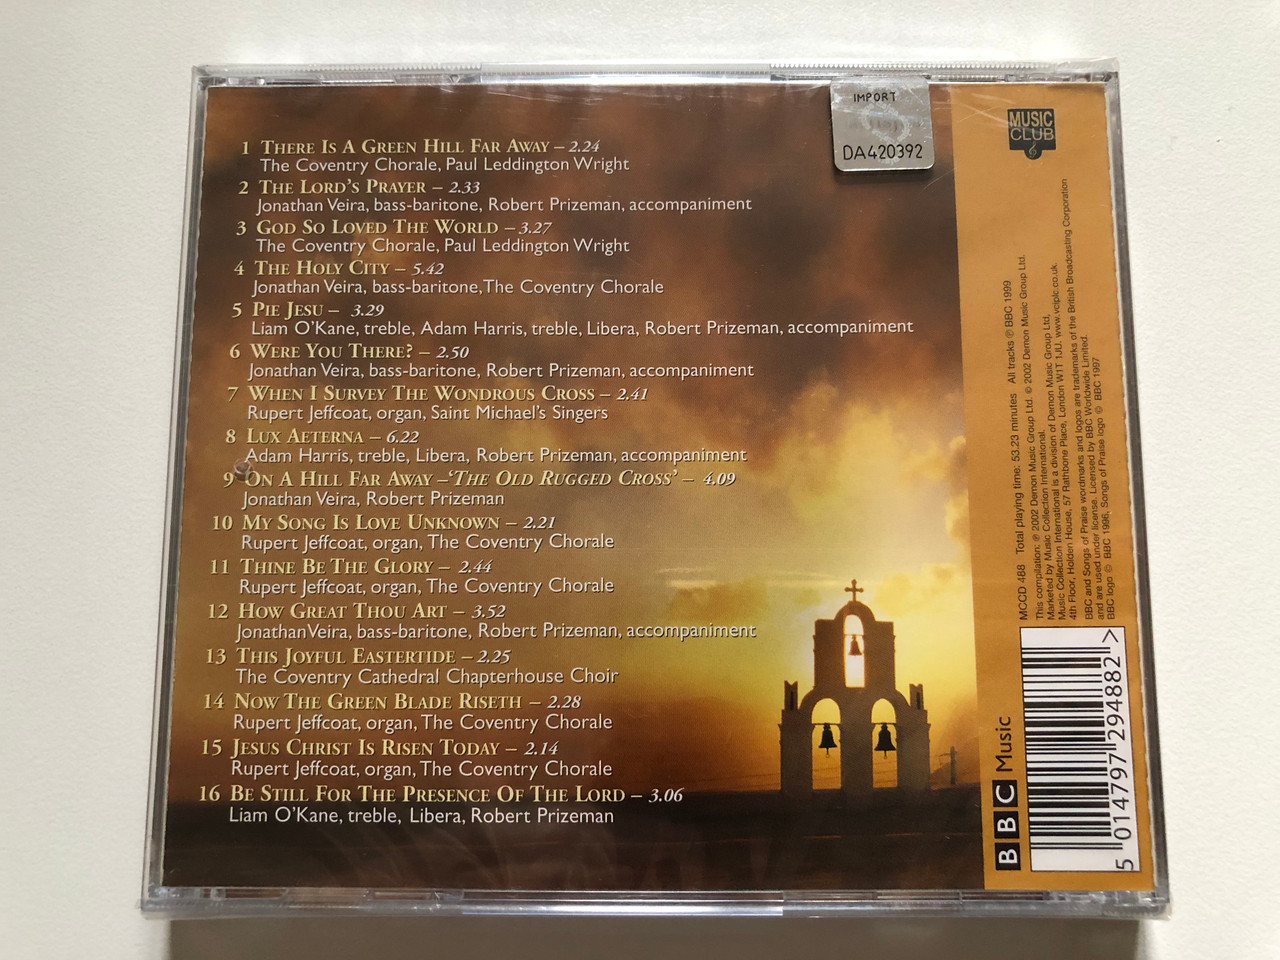 https://cdn10.bigcommerce.com/s-62bdpkt7pb/products/0/images/311145/Songs_of_Praise_Hymns_from_the_Holy_Land_-_Featuring_The_Old_Rugged_Cross_How_Great_Thou_Art_Pie_Jesu_and_many_others_BBC_Music_Audio_CD_2002_MCCD_448_2__80748.1699518588.1280.1280.JPG?c=2